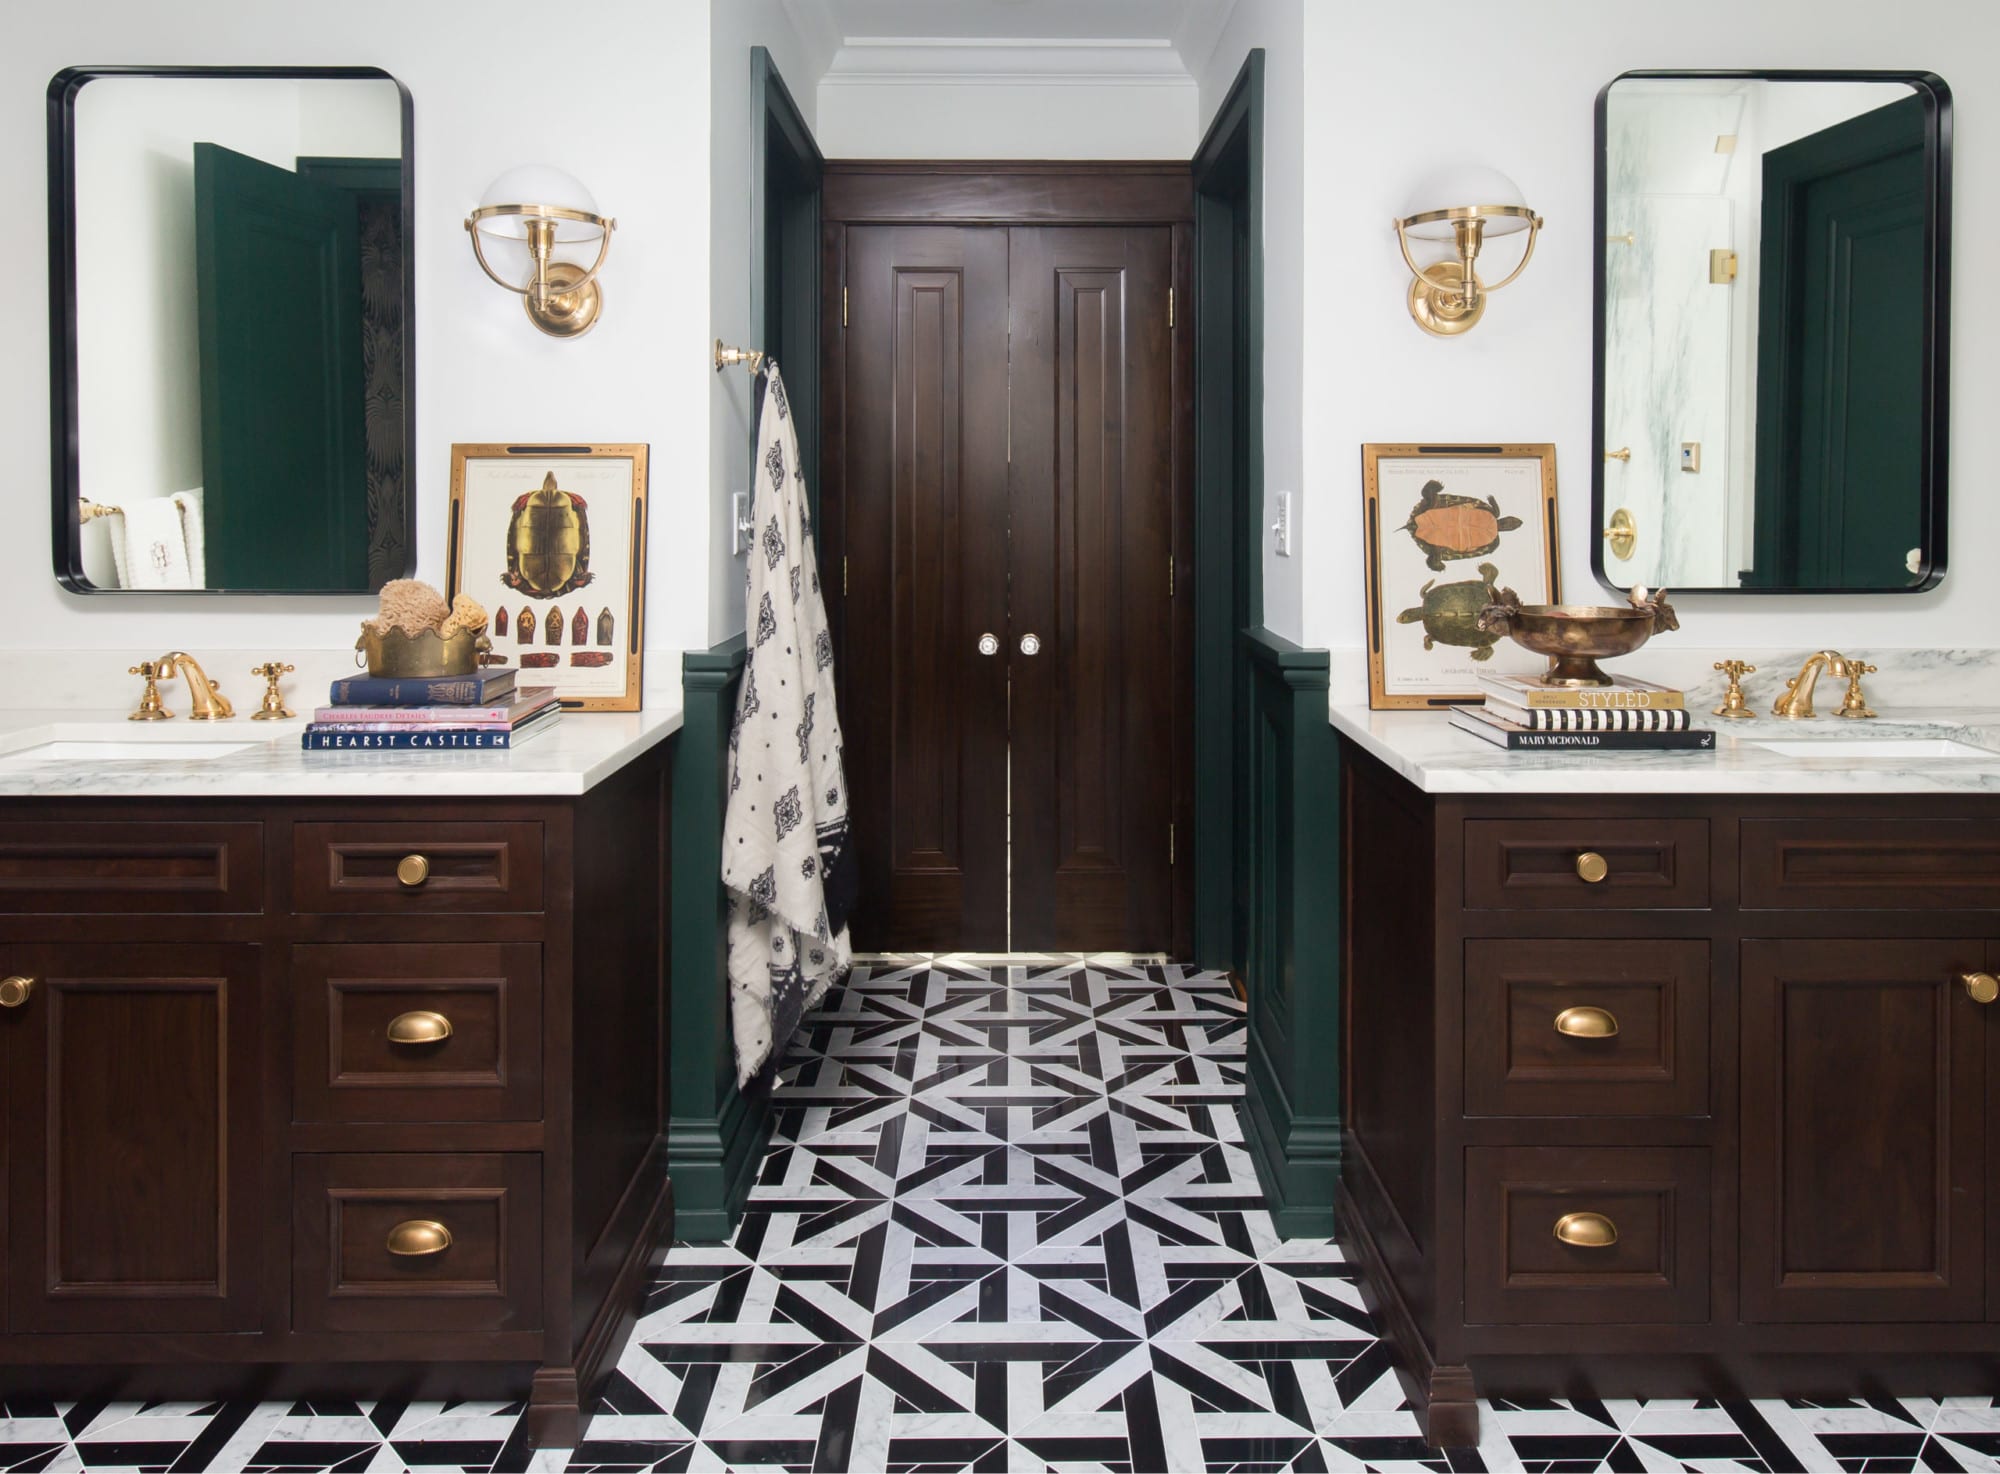 This remodel took a bold turn leaving patterned blue wallpaper and beige tile behind. It has no shyness as it sports a geometric tile floor, deep green wainscot panelling, and marbled shower walls. The patterned wallpaper brings warmth and energy to the space every day.